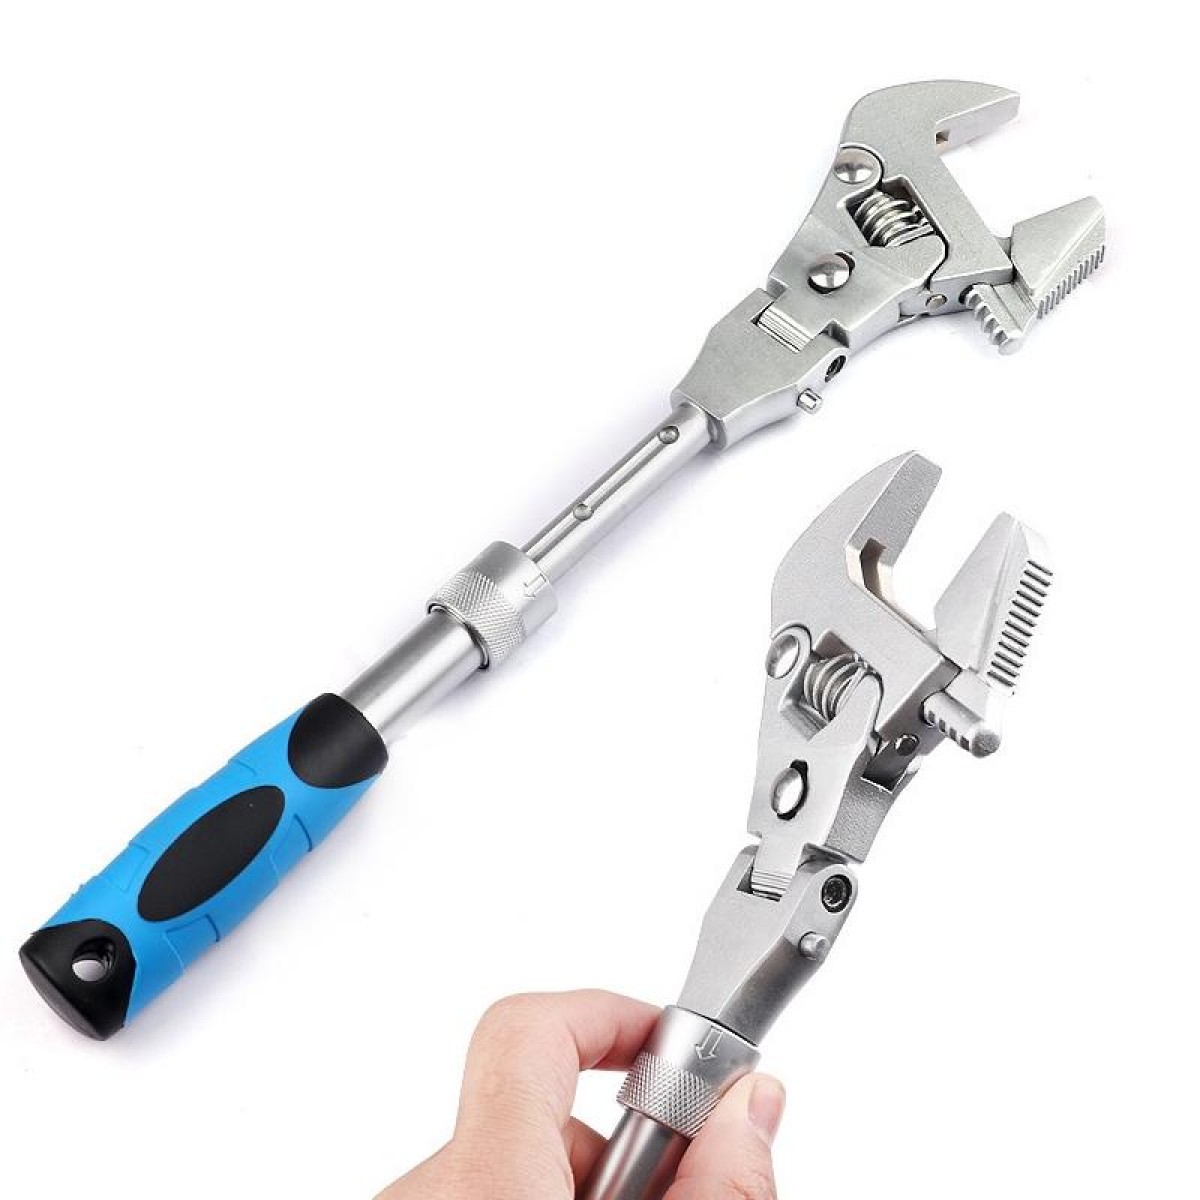 10 Inch Multifunctional Folding Shaking Head Ratchet Wrench Bathroom Wrench(2045)